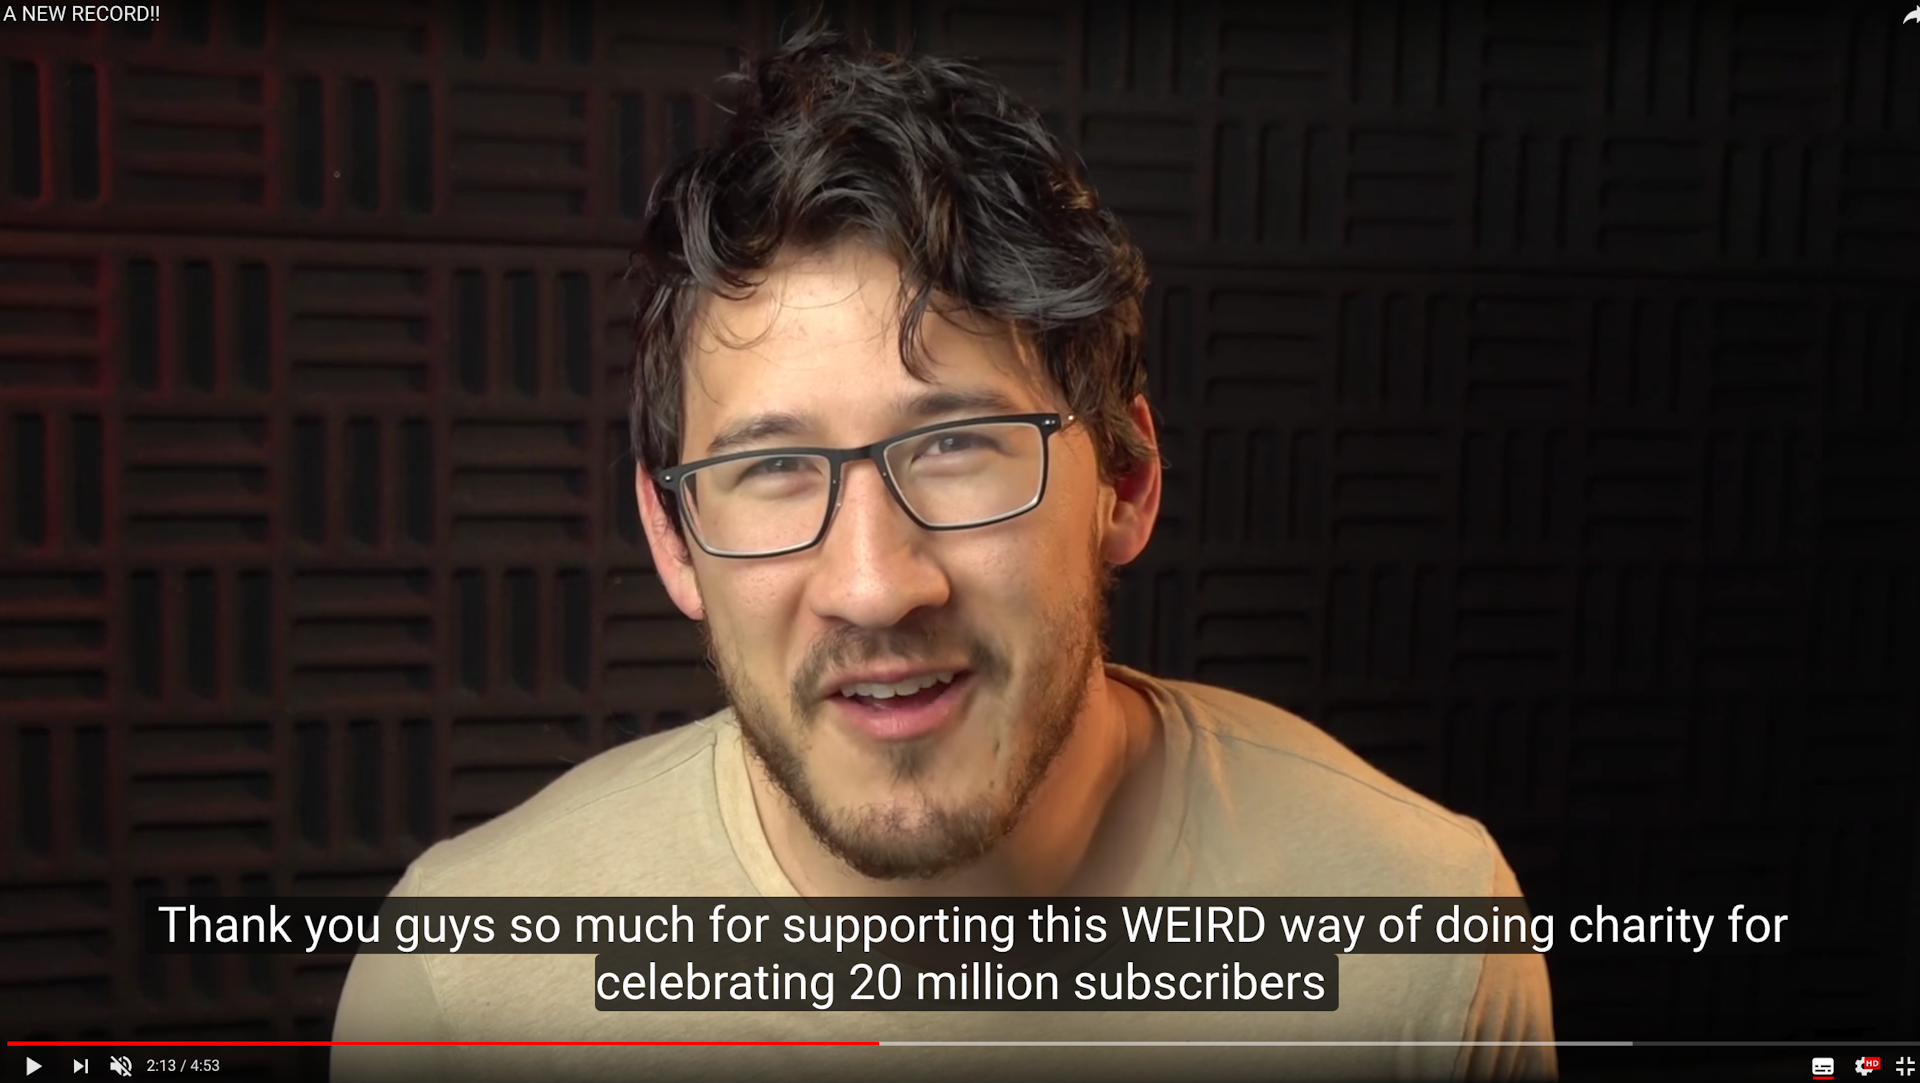 Top YouTuber Markiplier Raises $500,000 in just 48 Hours for Cancer Research